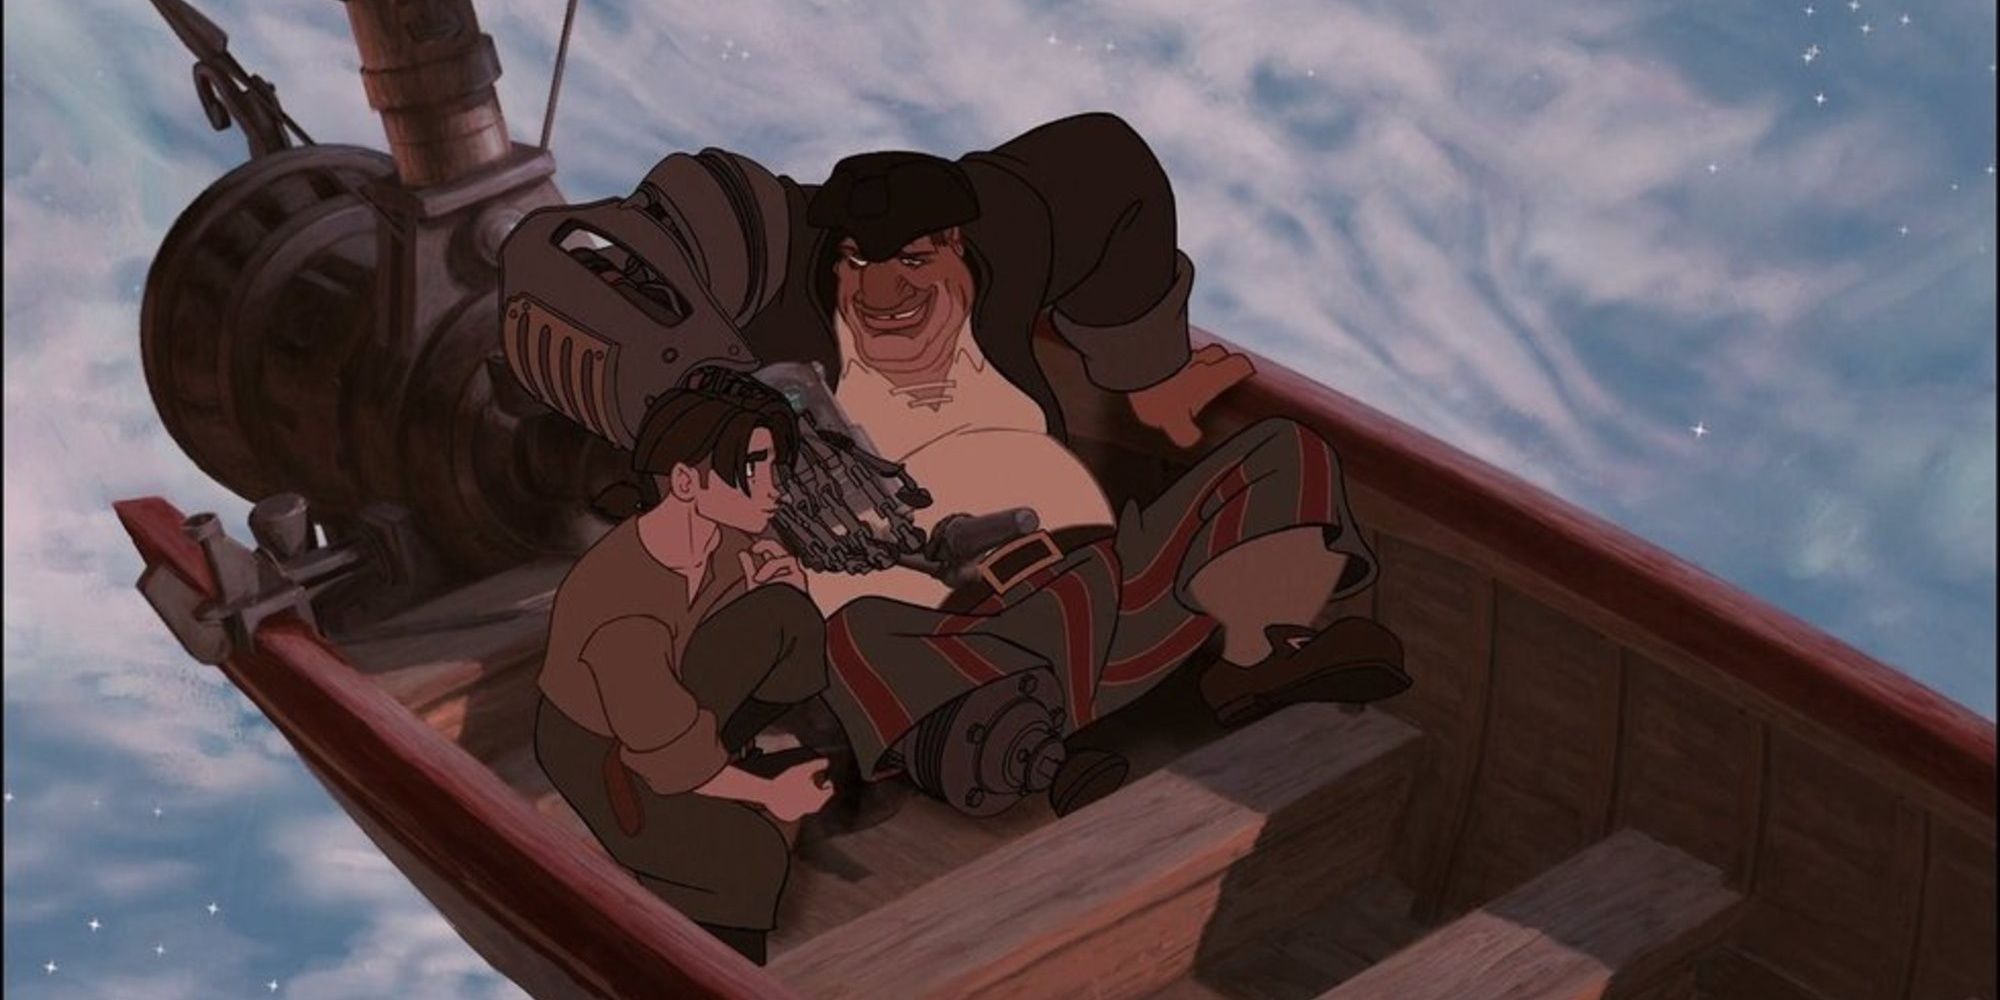 Jim and Silver in a lifeboat in Treasure Planet